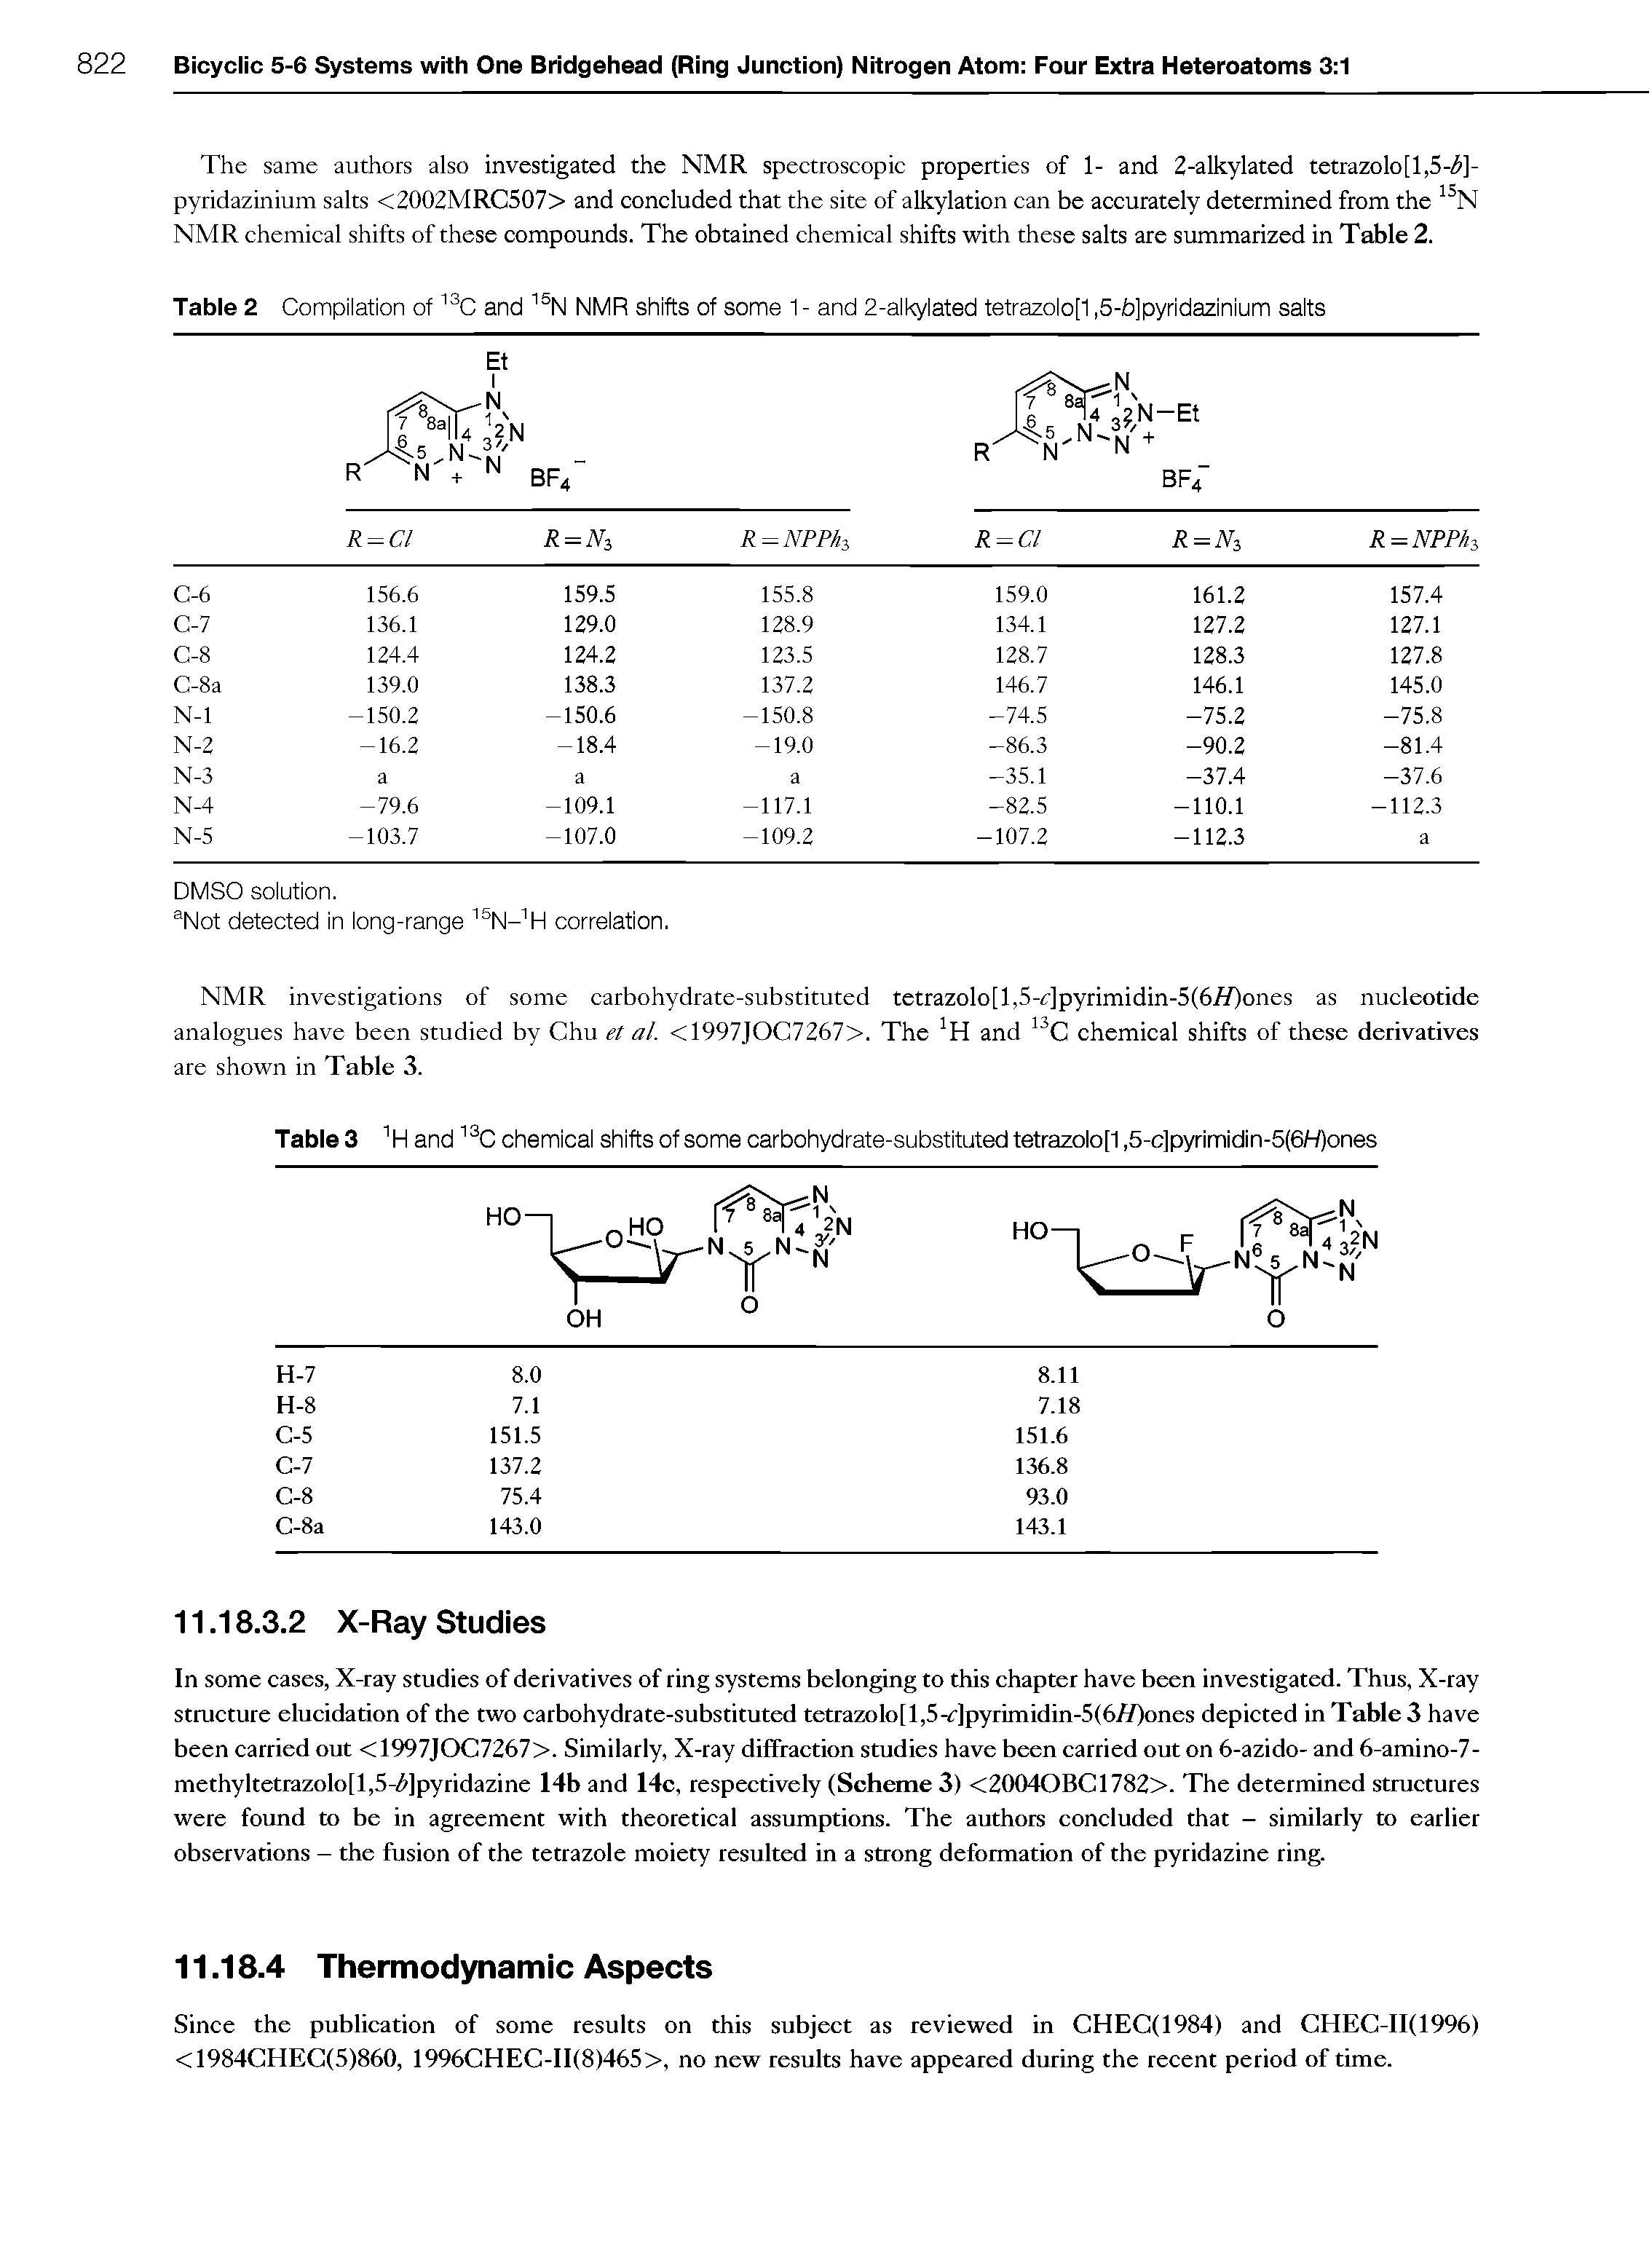 Table 2 Compilation of 13C and 15N NMR shifts of some 1 - and 2-alkylated tetrazolo[1,5-b]pyridazinium salts...